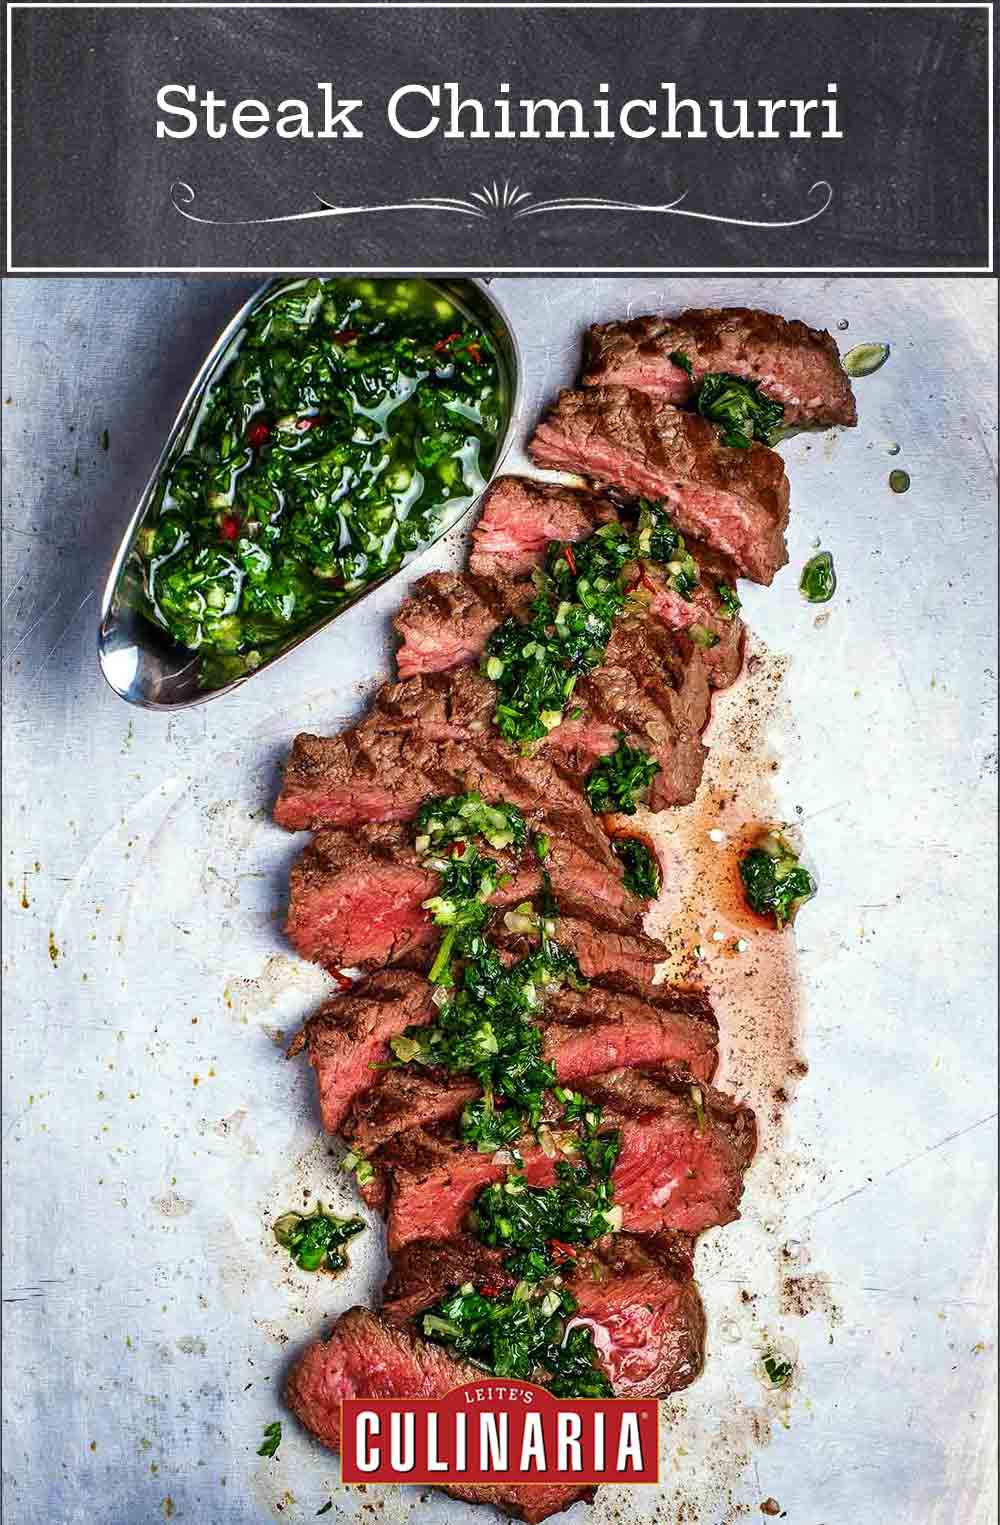 This simple steak chimichurri is made with grilled steak that's topped with a tangy herb and garlic sauce. It's easy, but so impressive that we've got it on repeat all summer long. #steak #grilling #chimichurri #easy